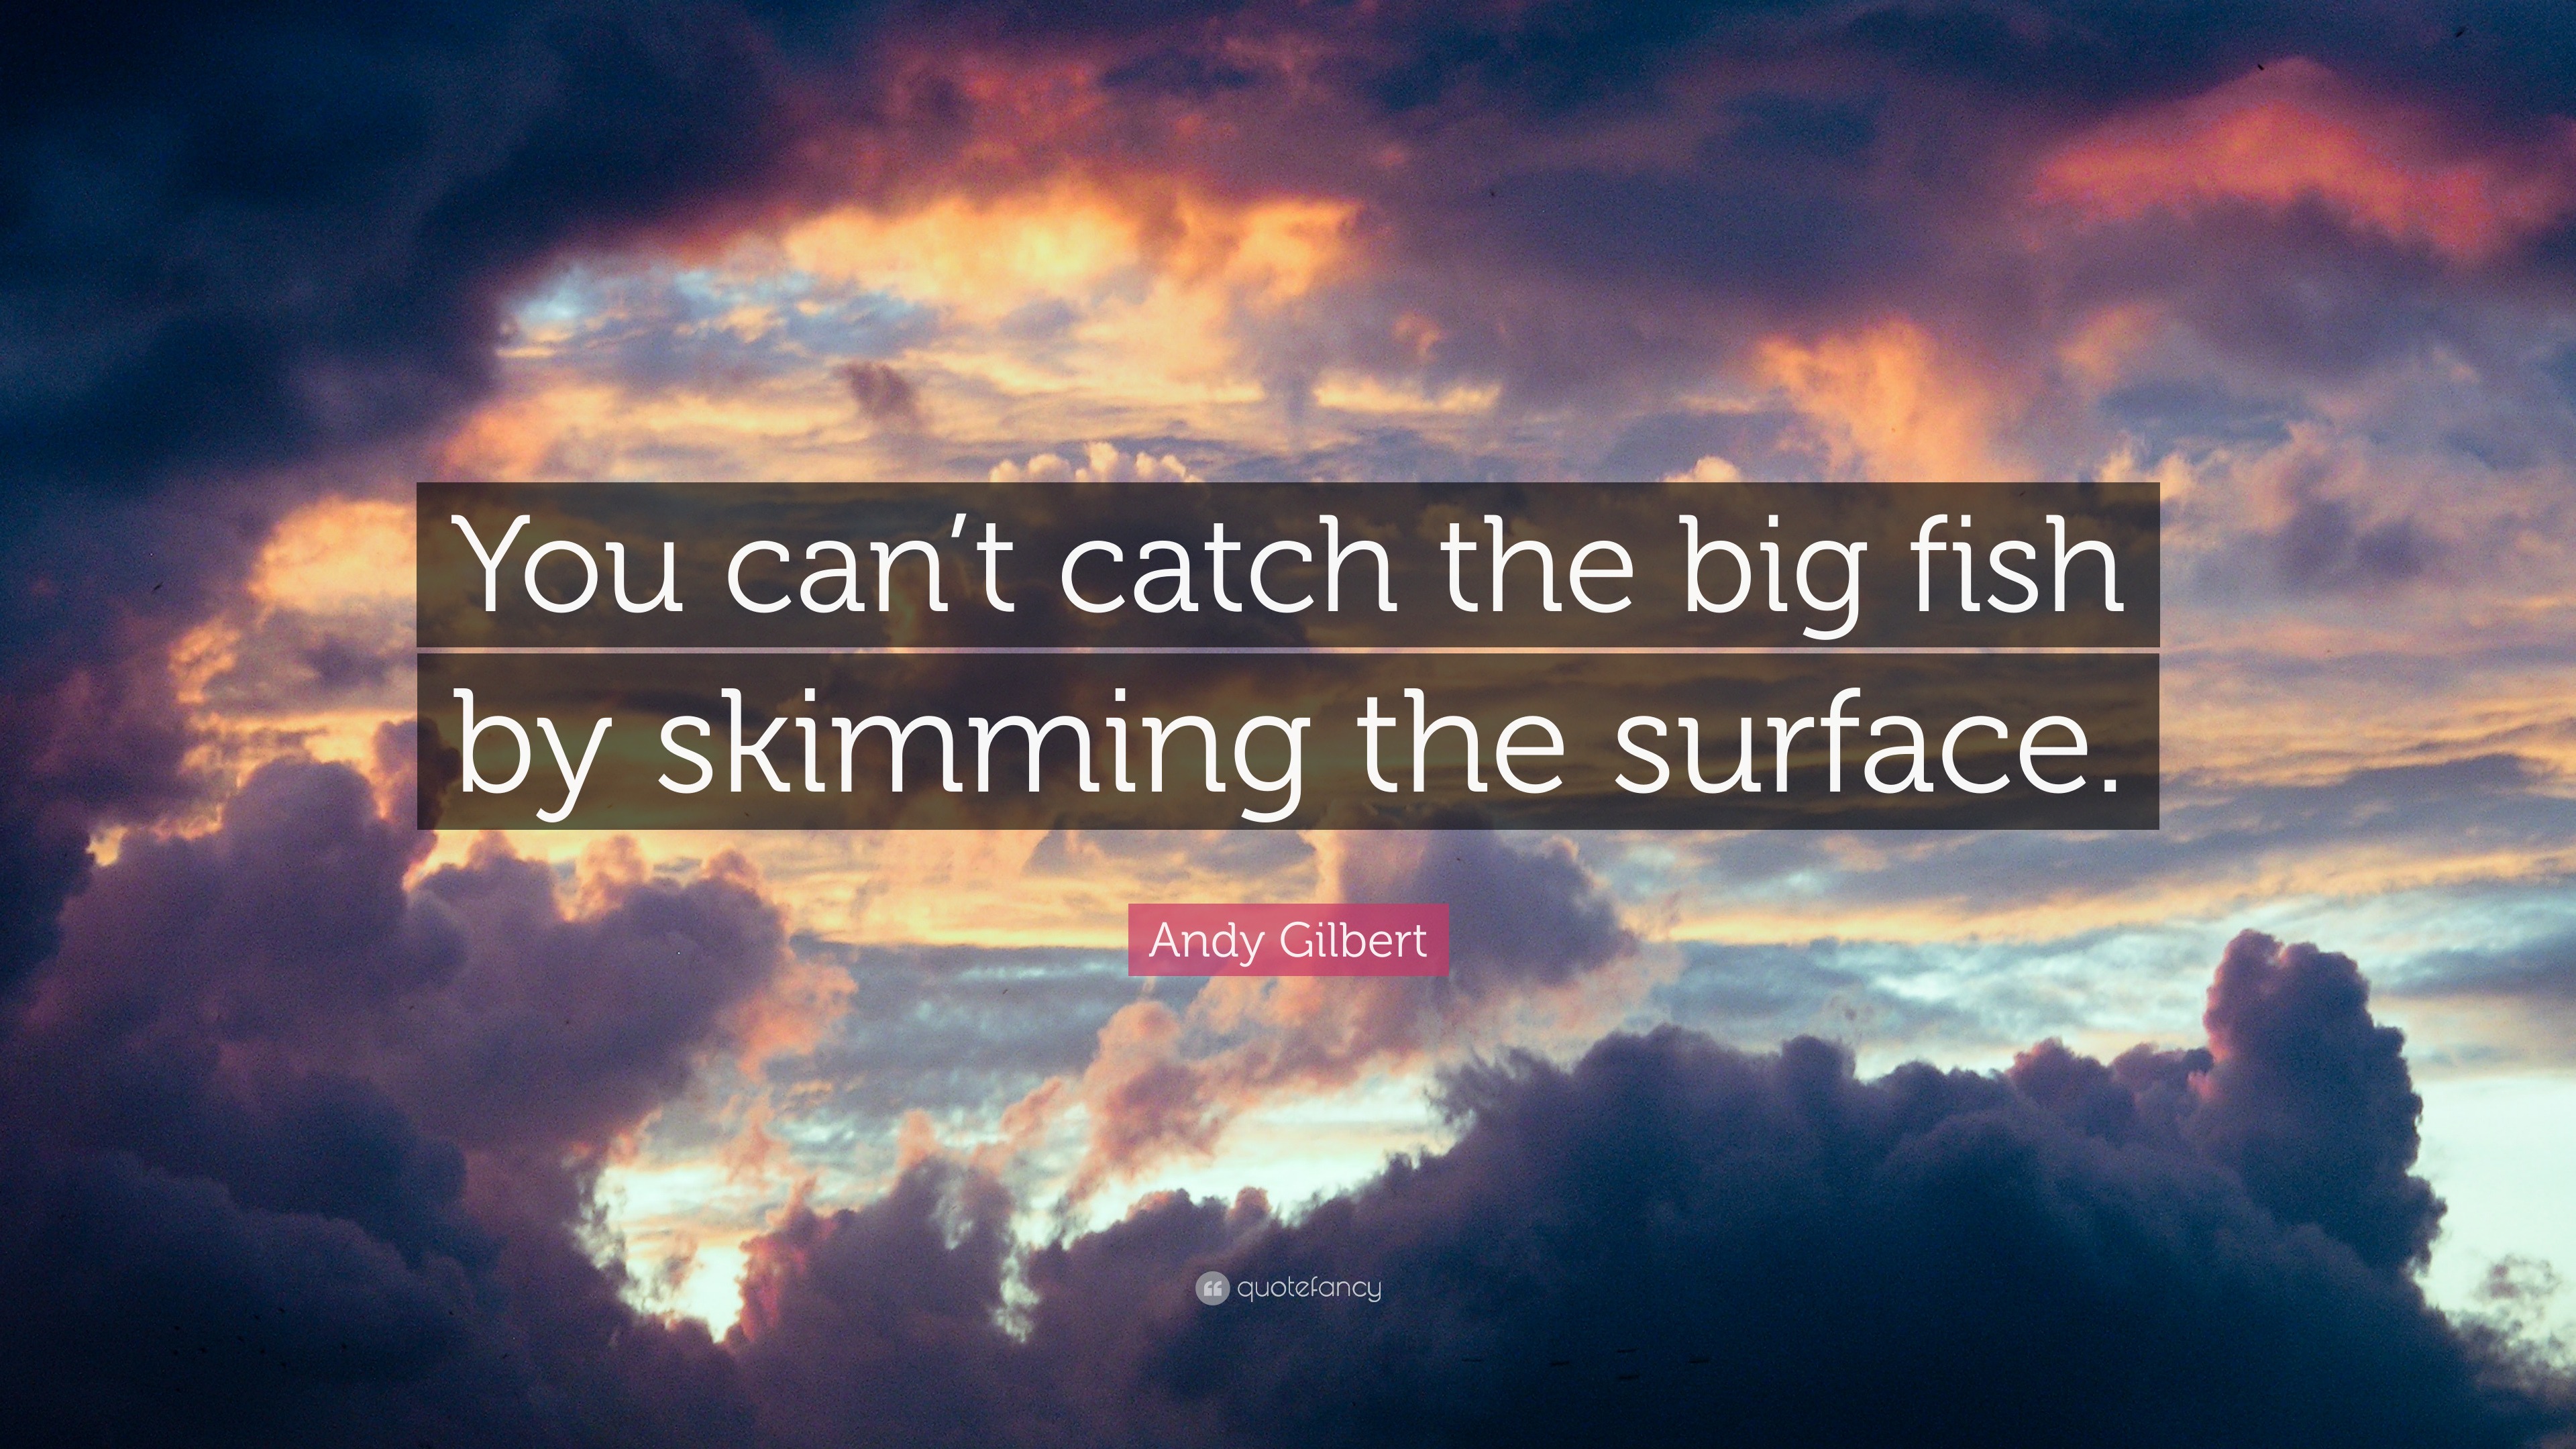 Andy Gilbert Quote: “You can't catch the big fish by skimming the surface.”